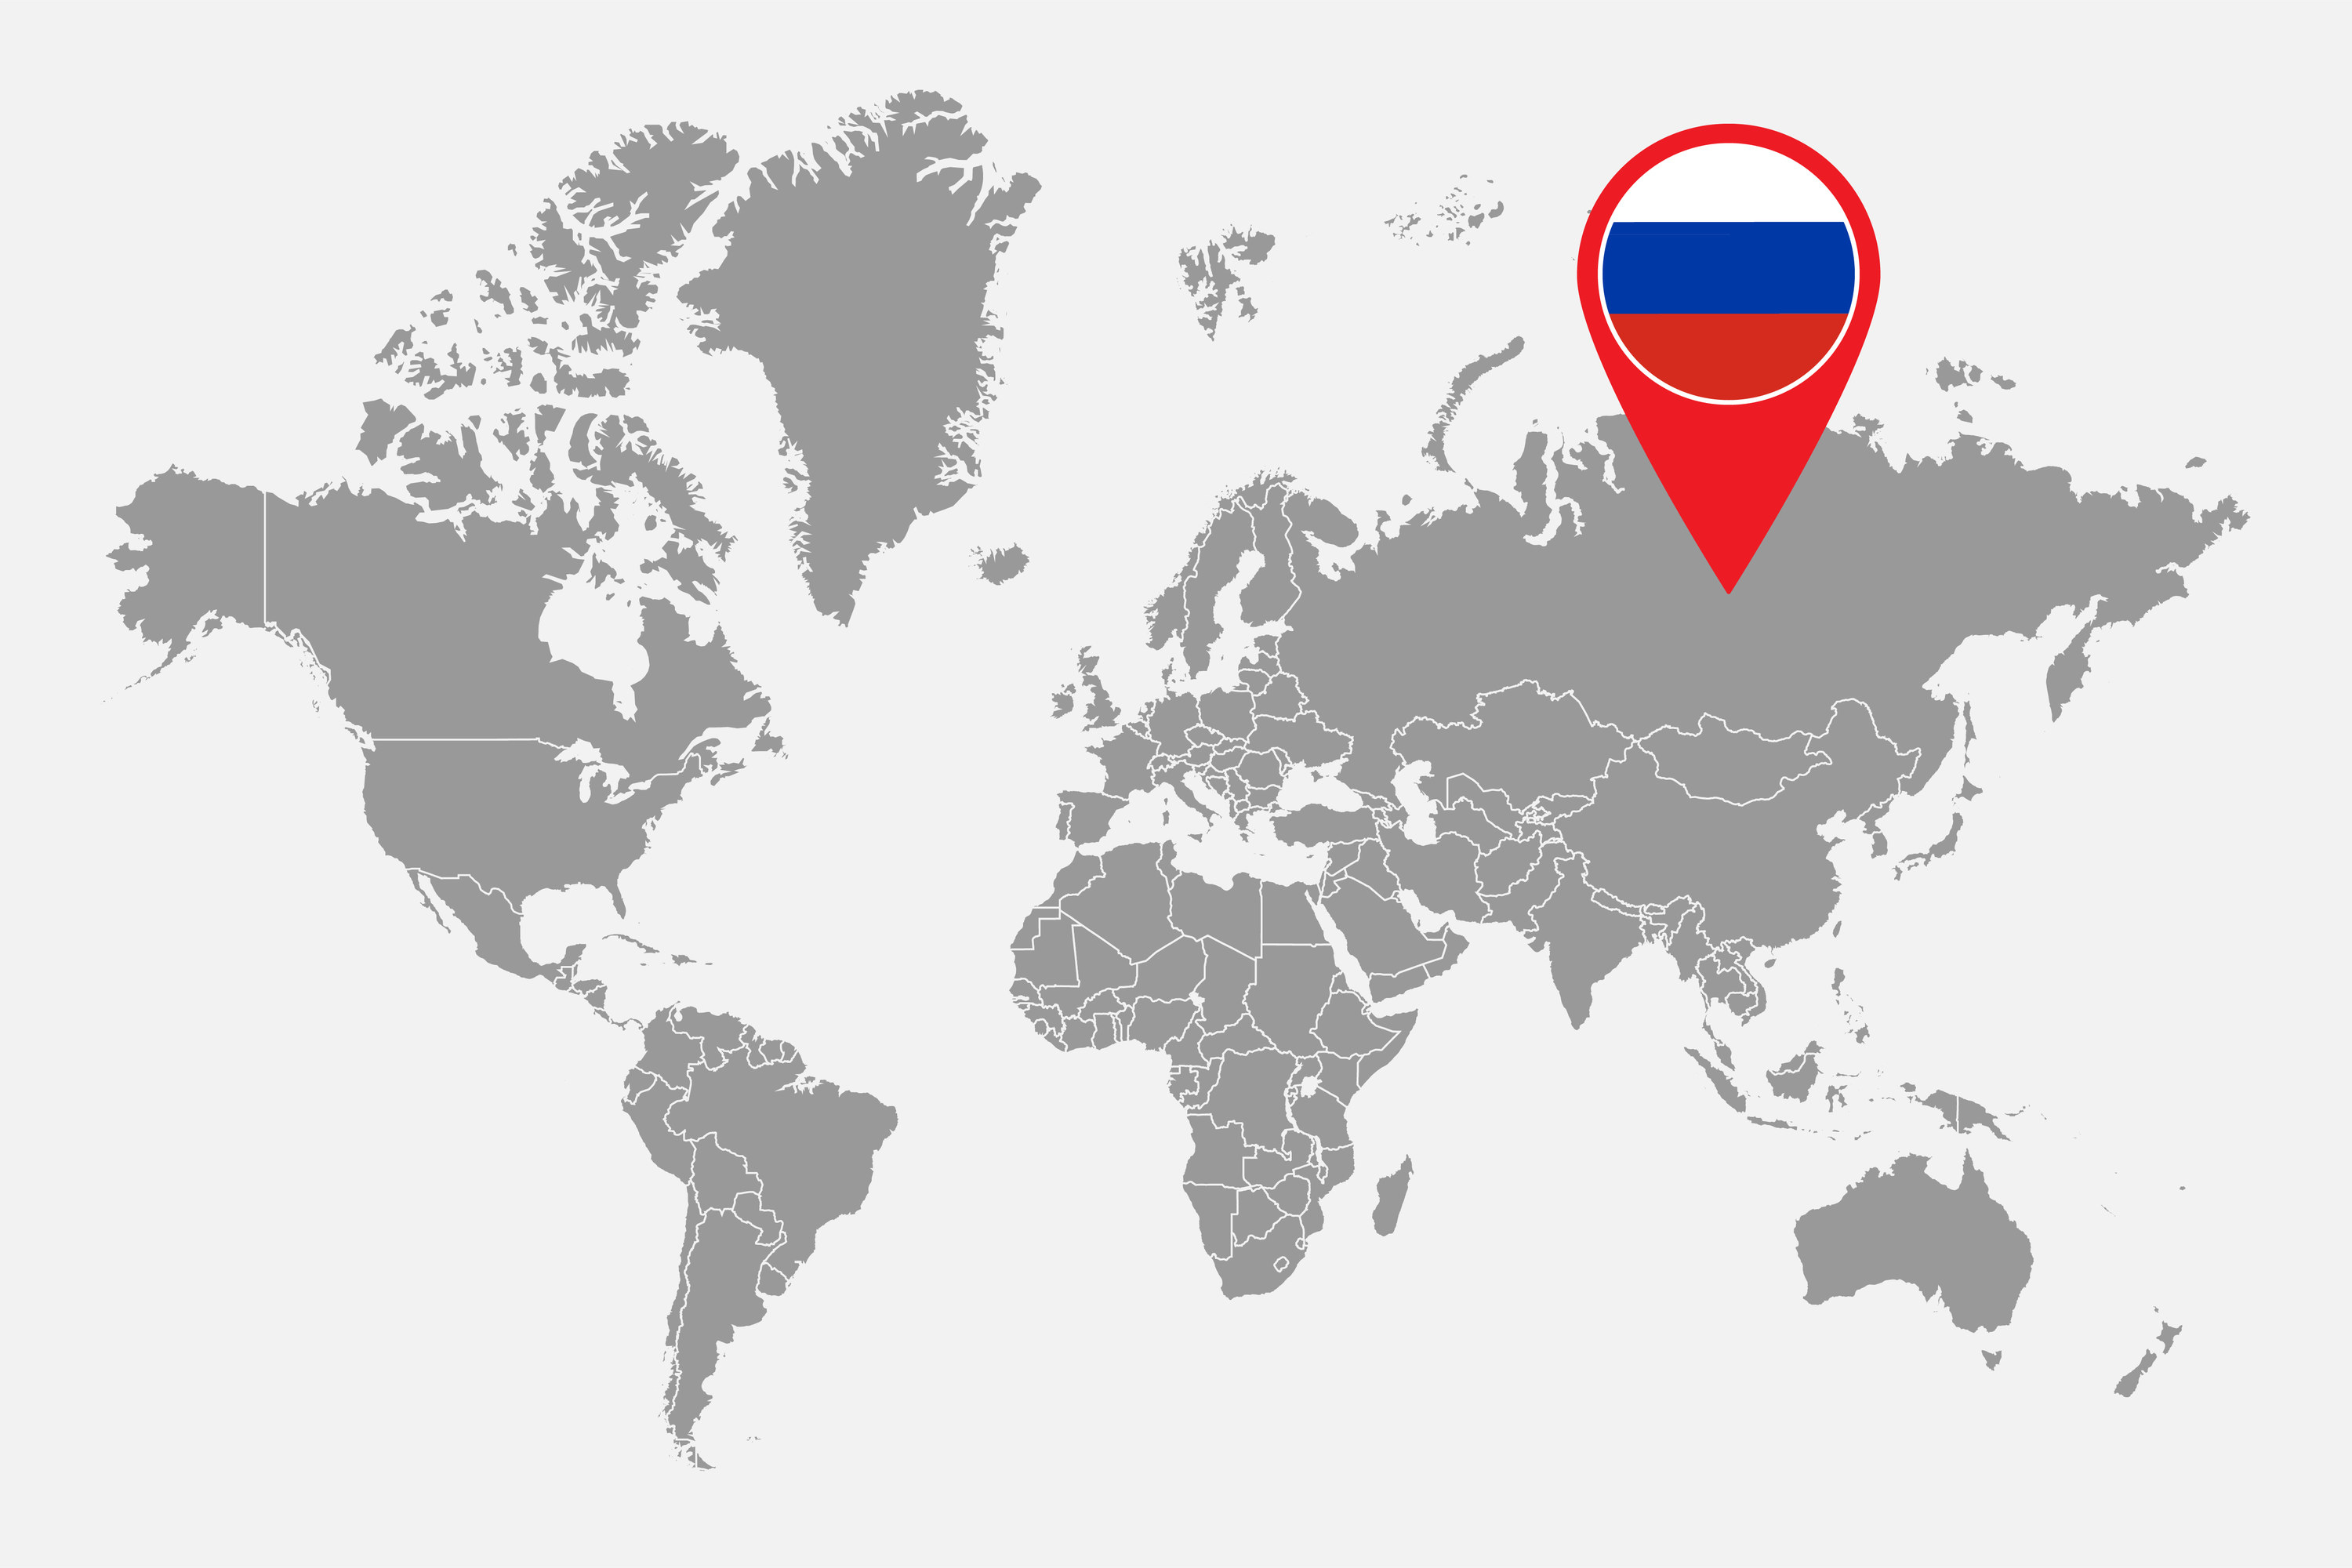 A world map with the Russian Federation indicated